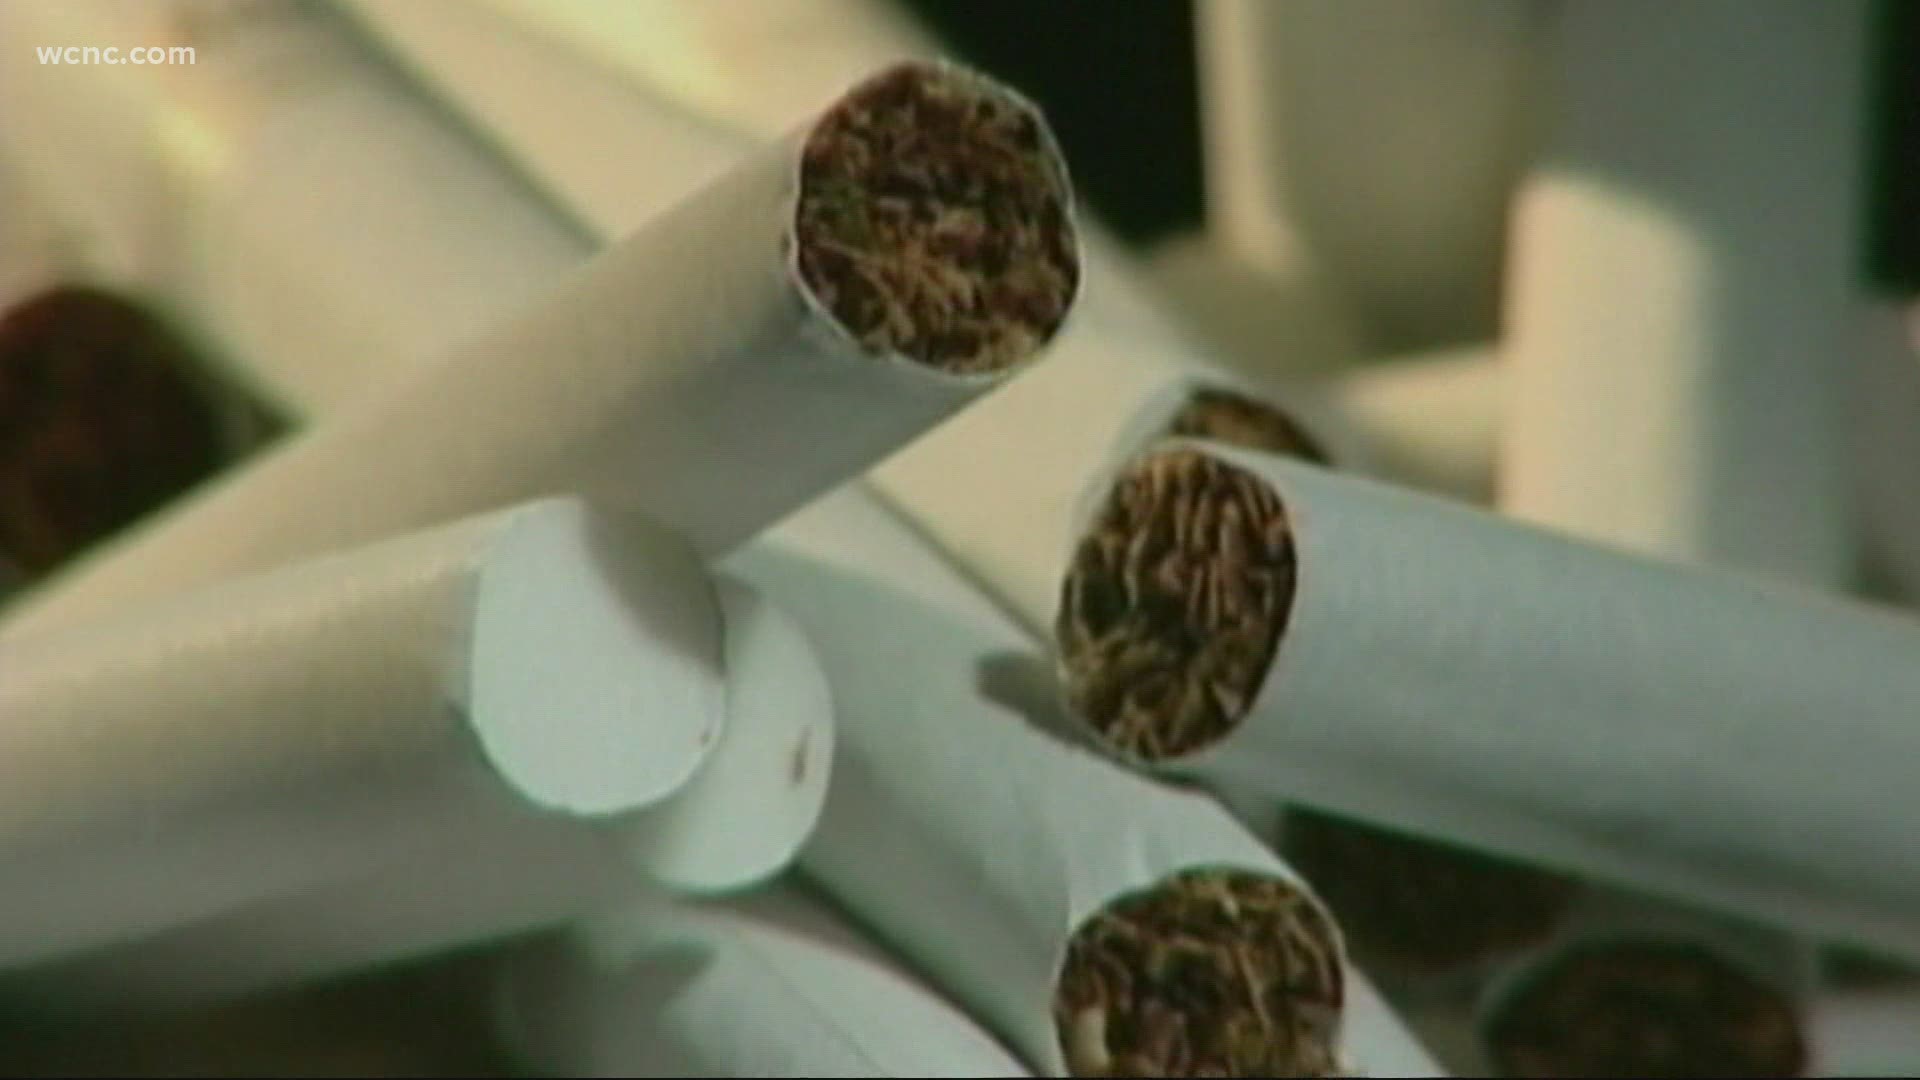 We speak with a doctor on the push to ban the cigarettes.